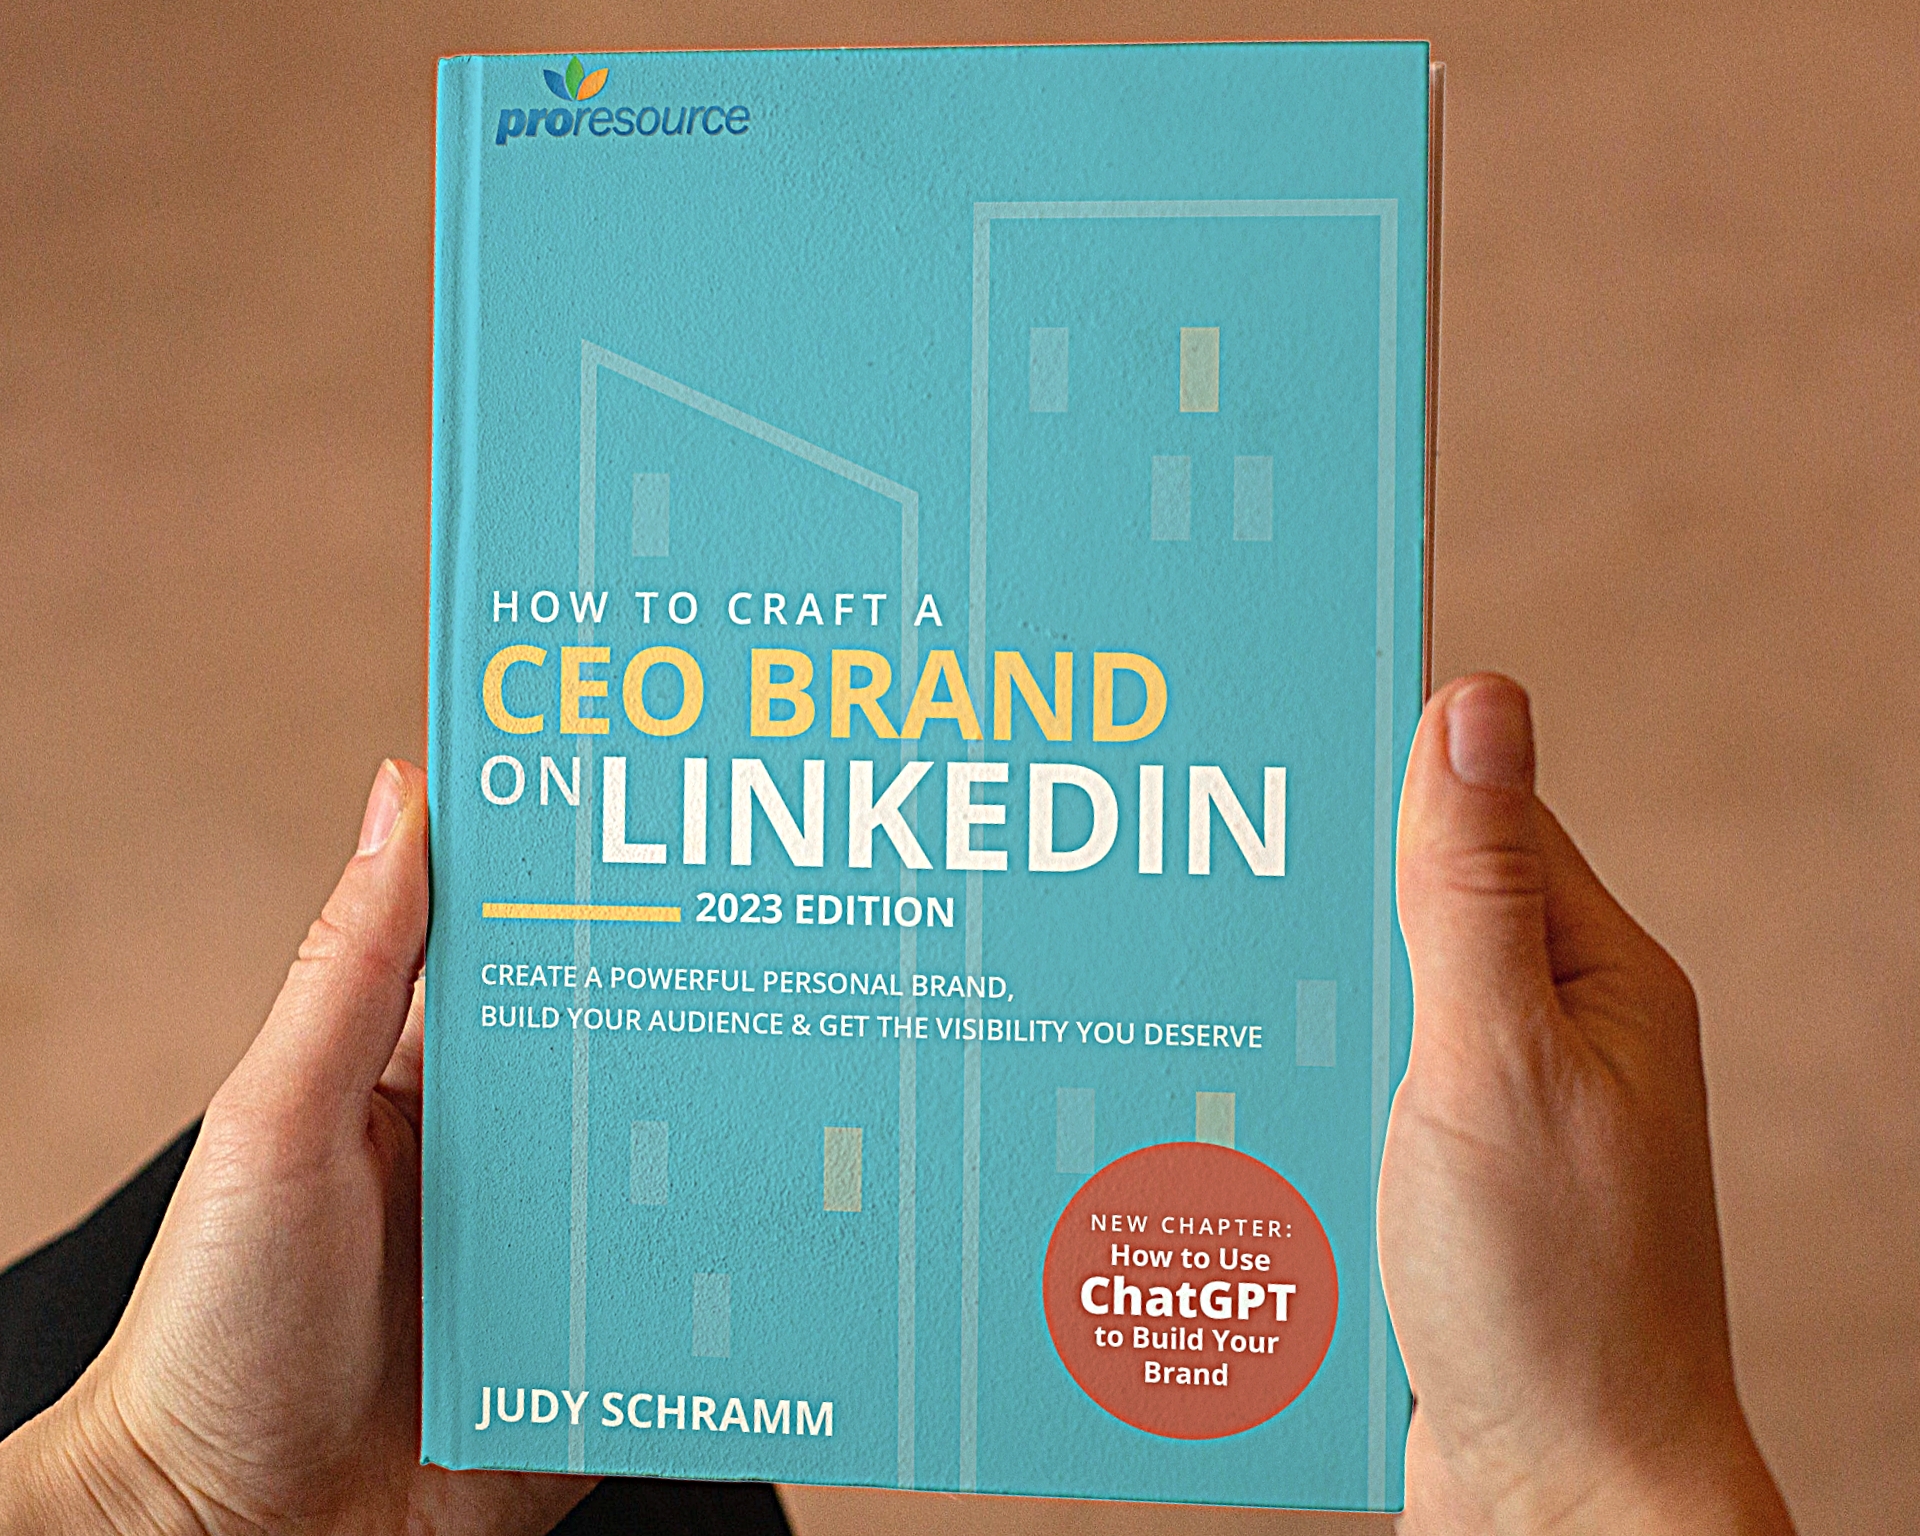 How to craft a ceo brand on Linkedin by judy schramm